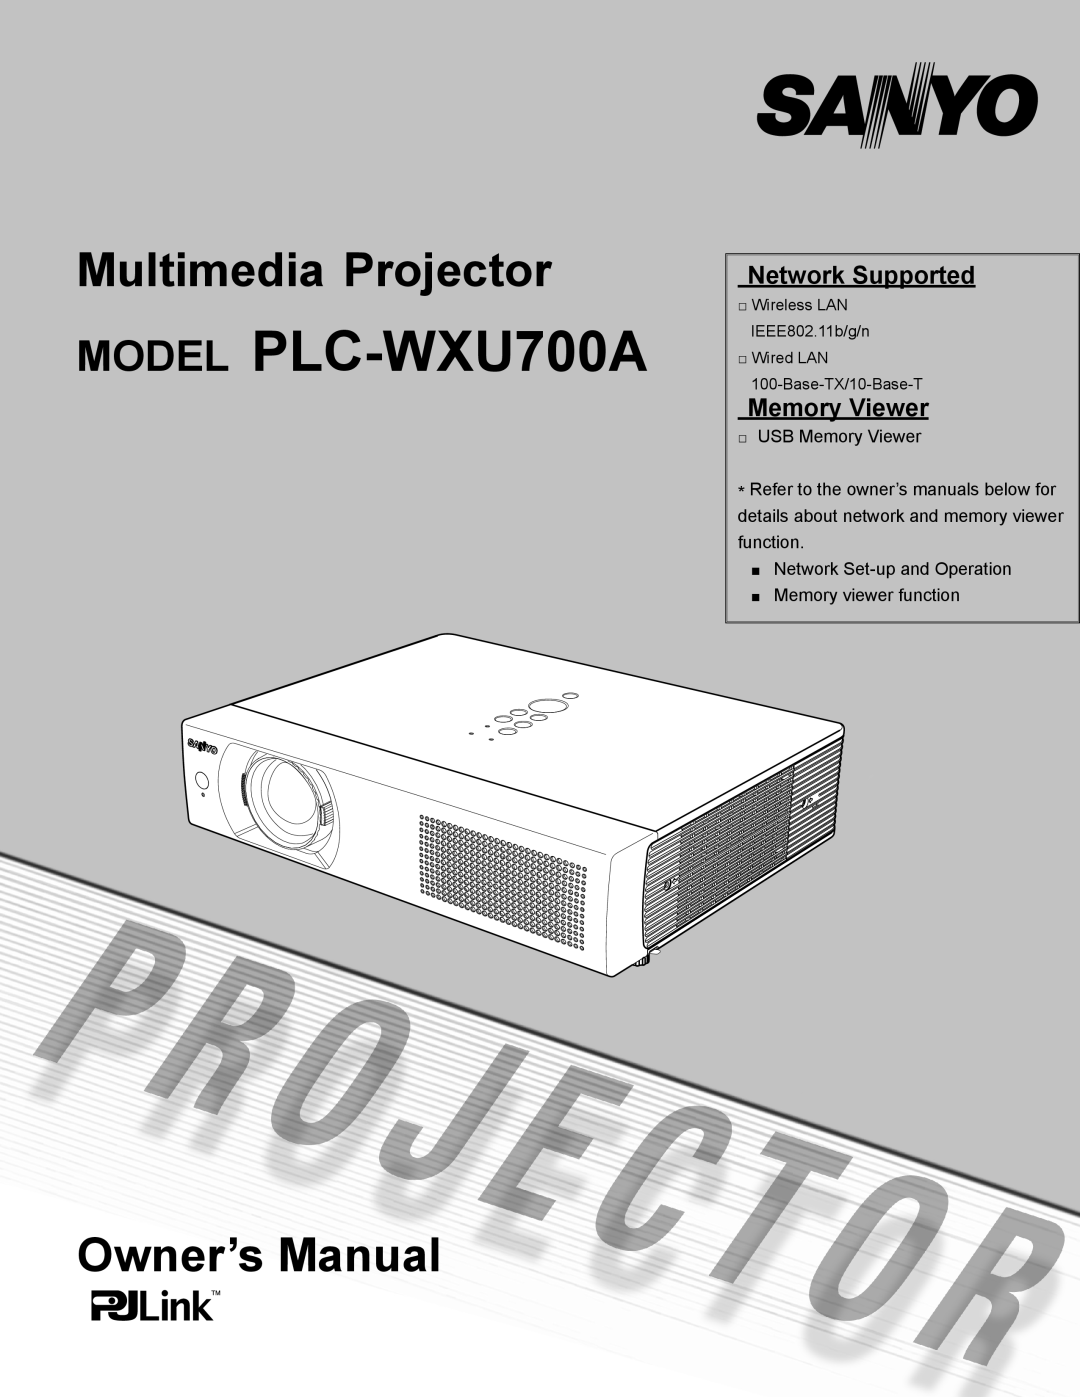 Sanyo owner manual Network Supported, Memory Viewer, MODEL PLC-WXU700A, Multimedia Projector 